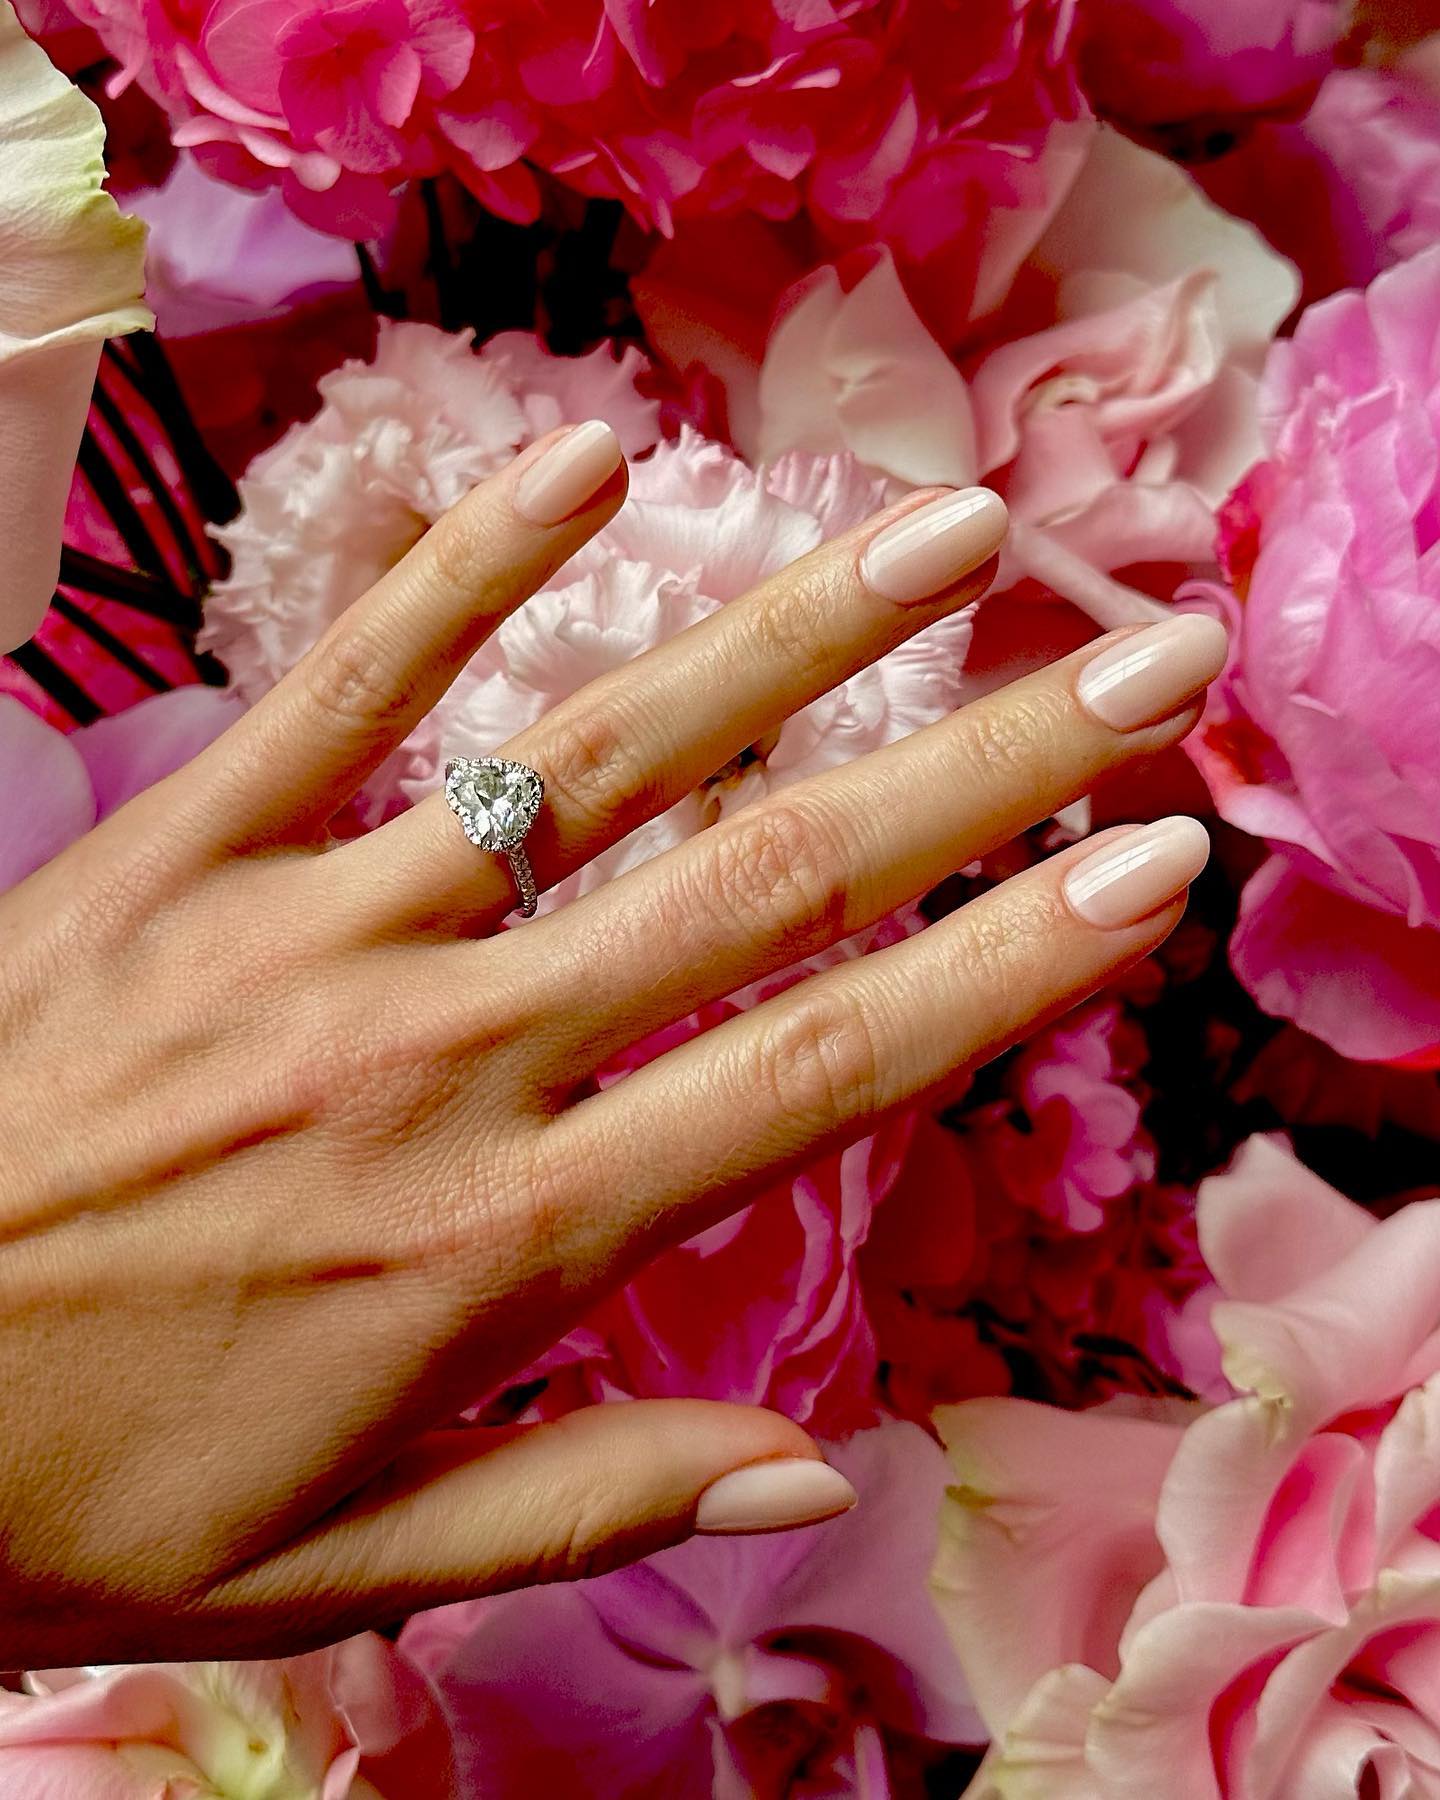 Margot Robbie's manicure with sheer pink polish